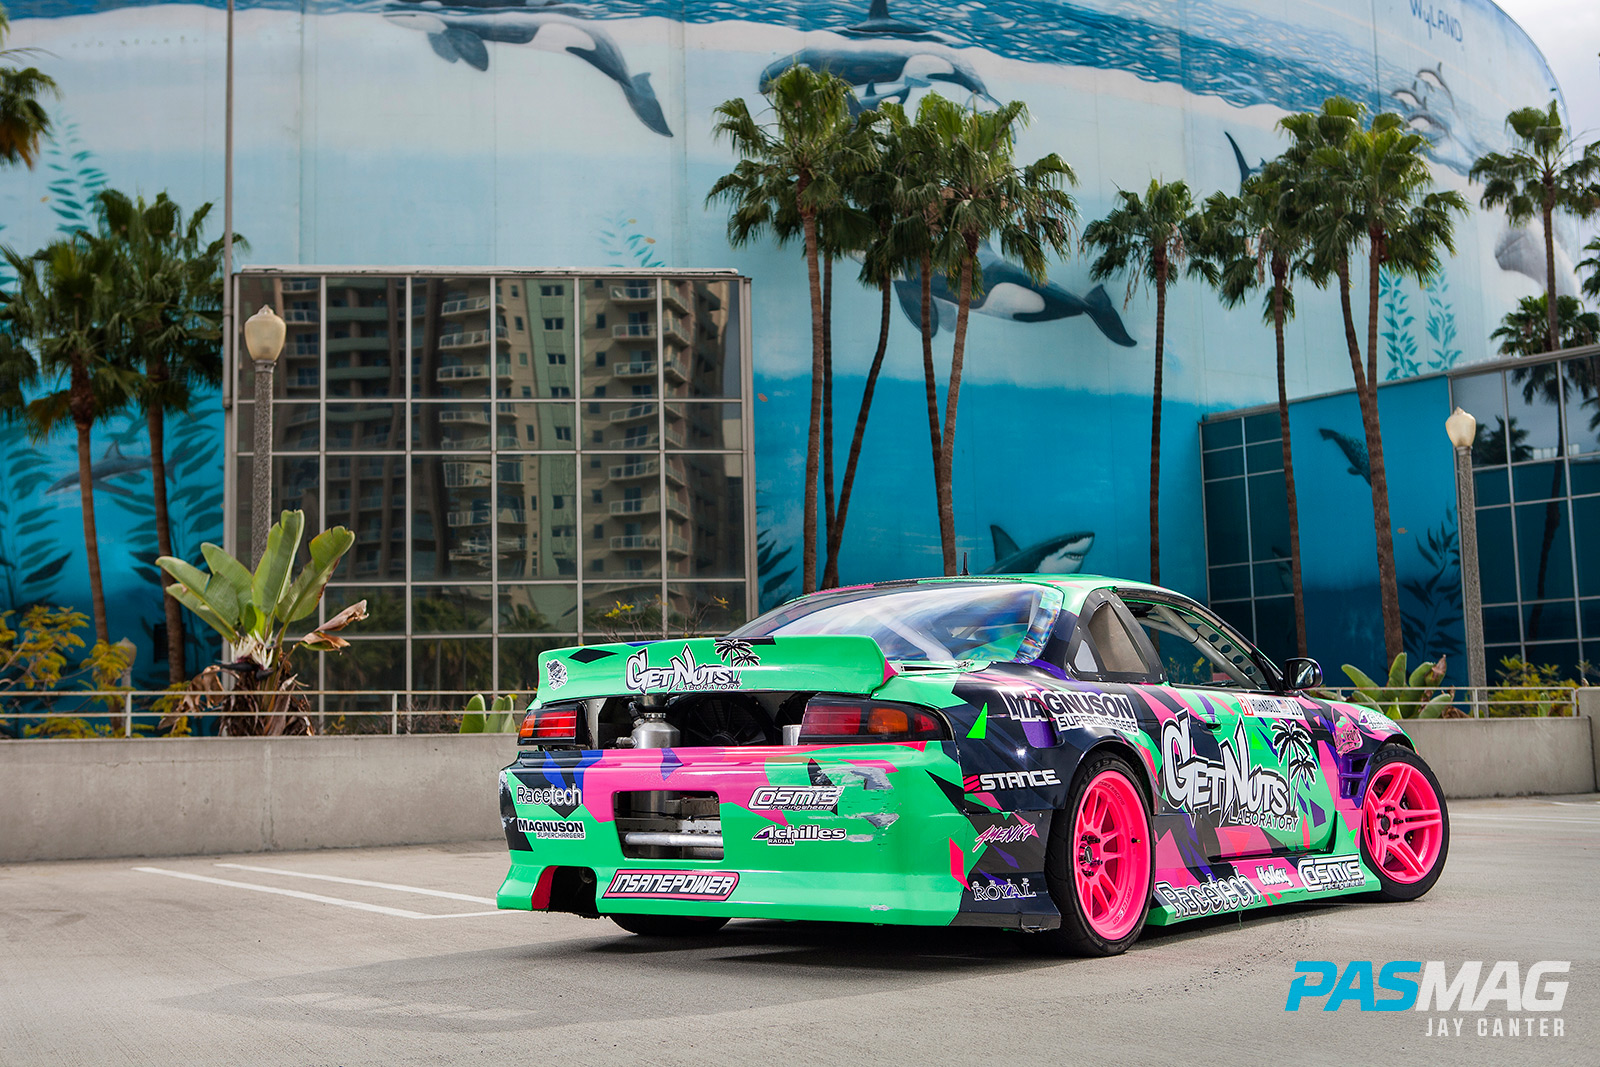 Alec Hohnadell 1995 Nissan 240sx S14 PASMAG canter 1